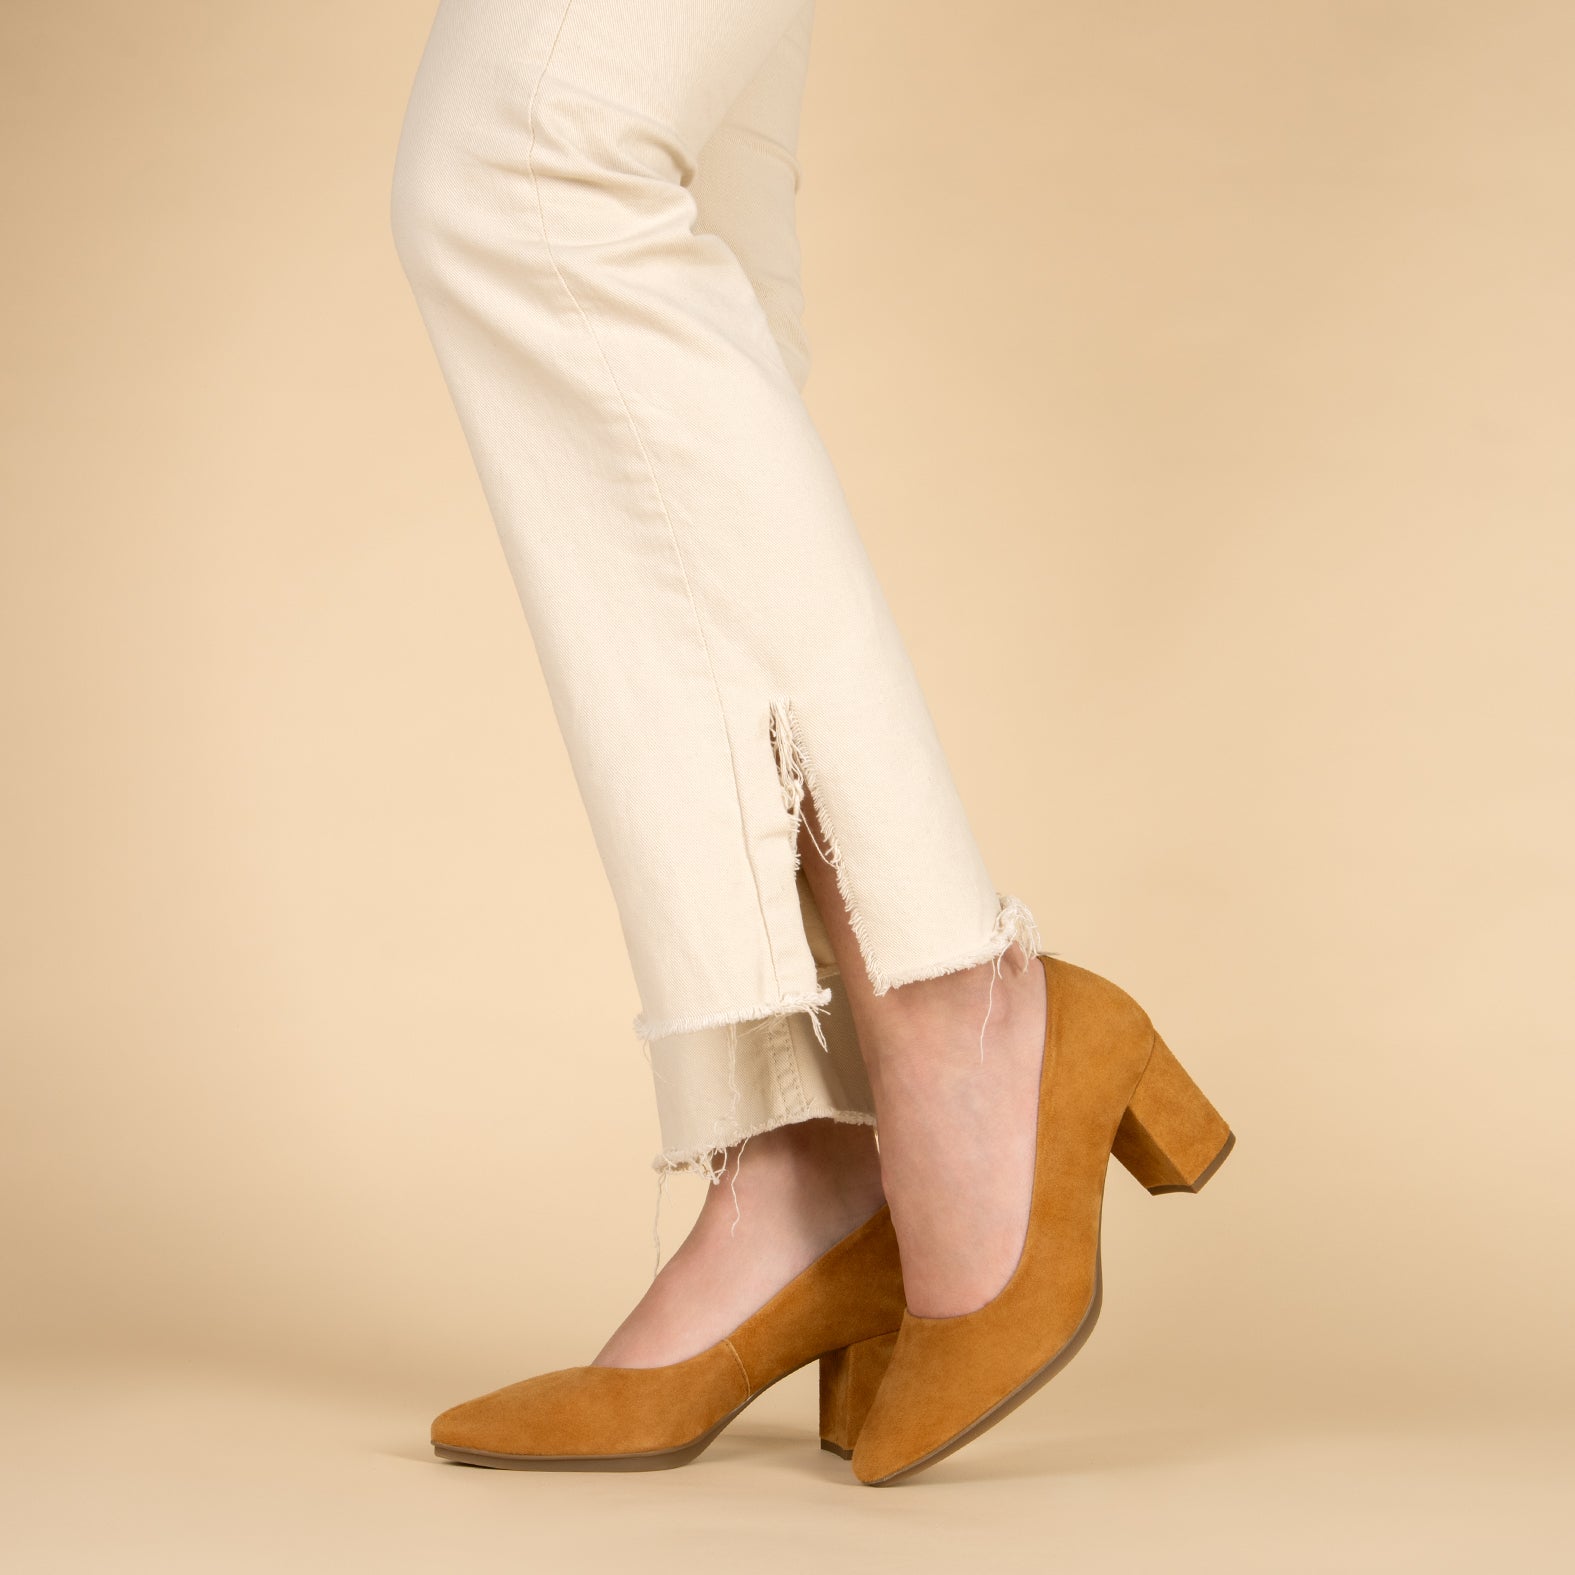 URBAN S – BROWN Suede Mid-Heeled Shoes 